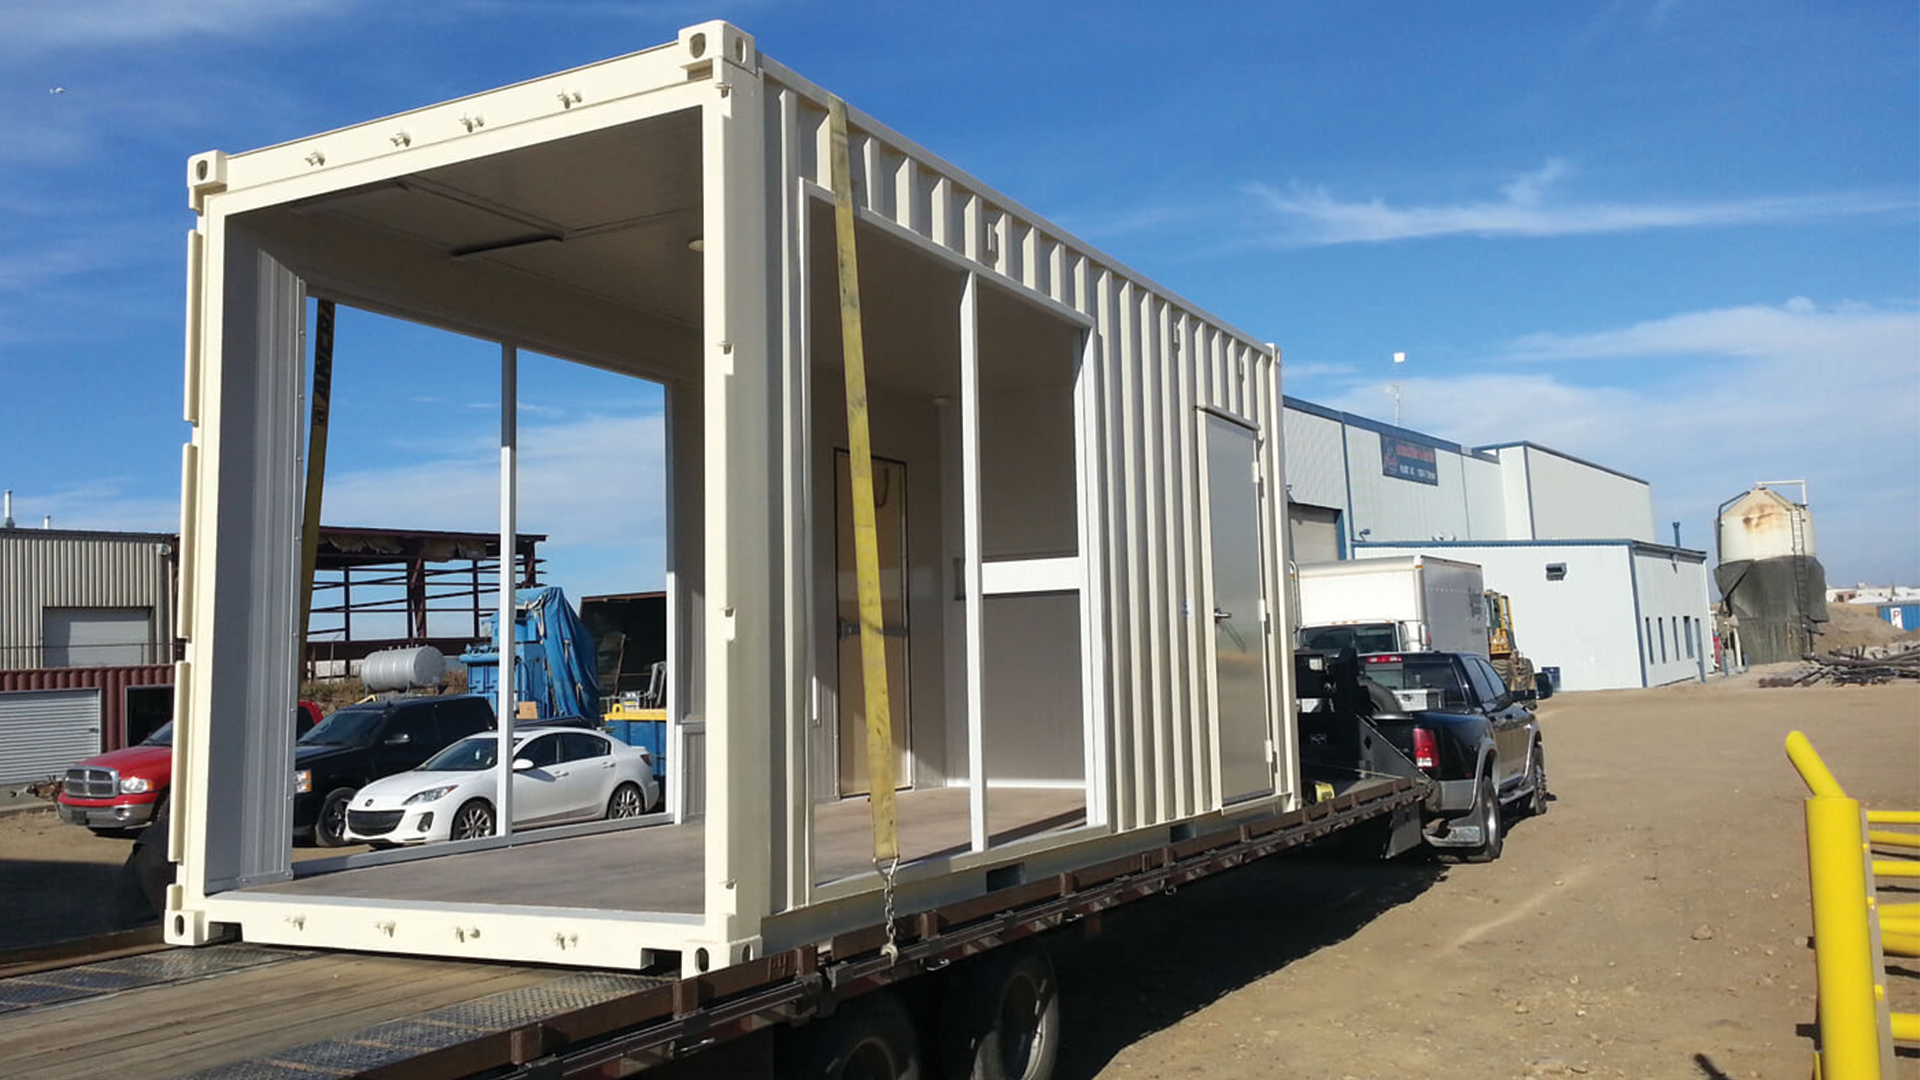 Exterior of smaller container with three open sides sitting on top of trailer